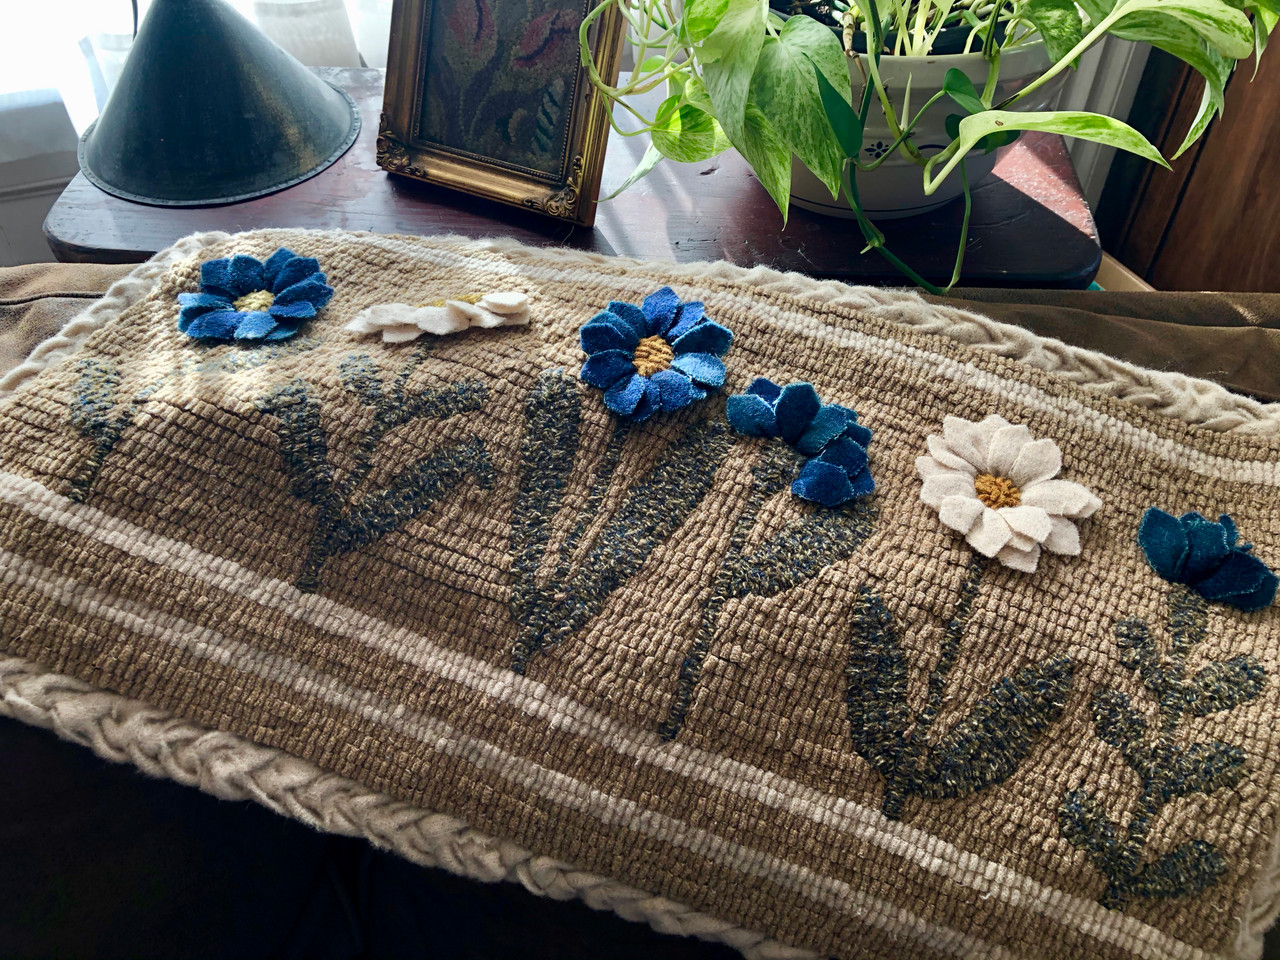 Carpet embroidery with printed pattern Leaf flowers Latch Hook